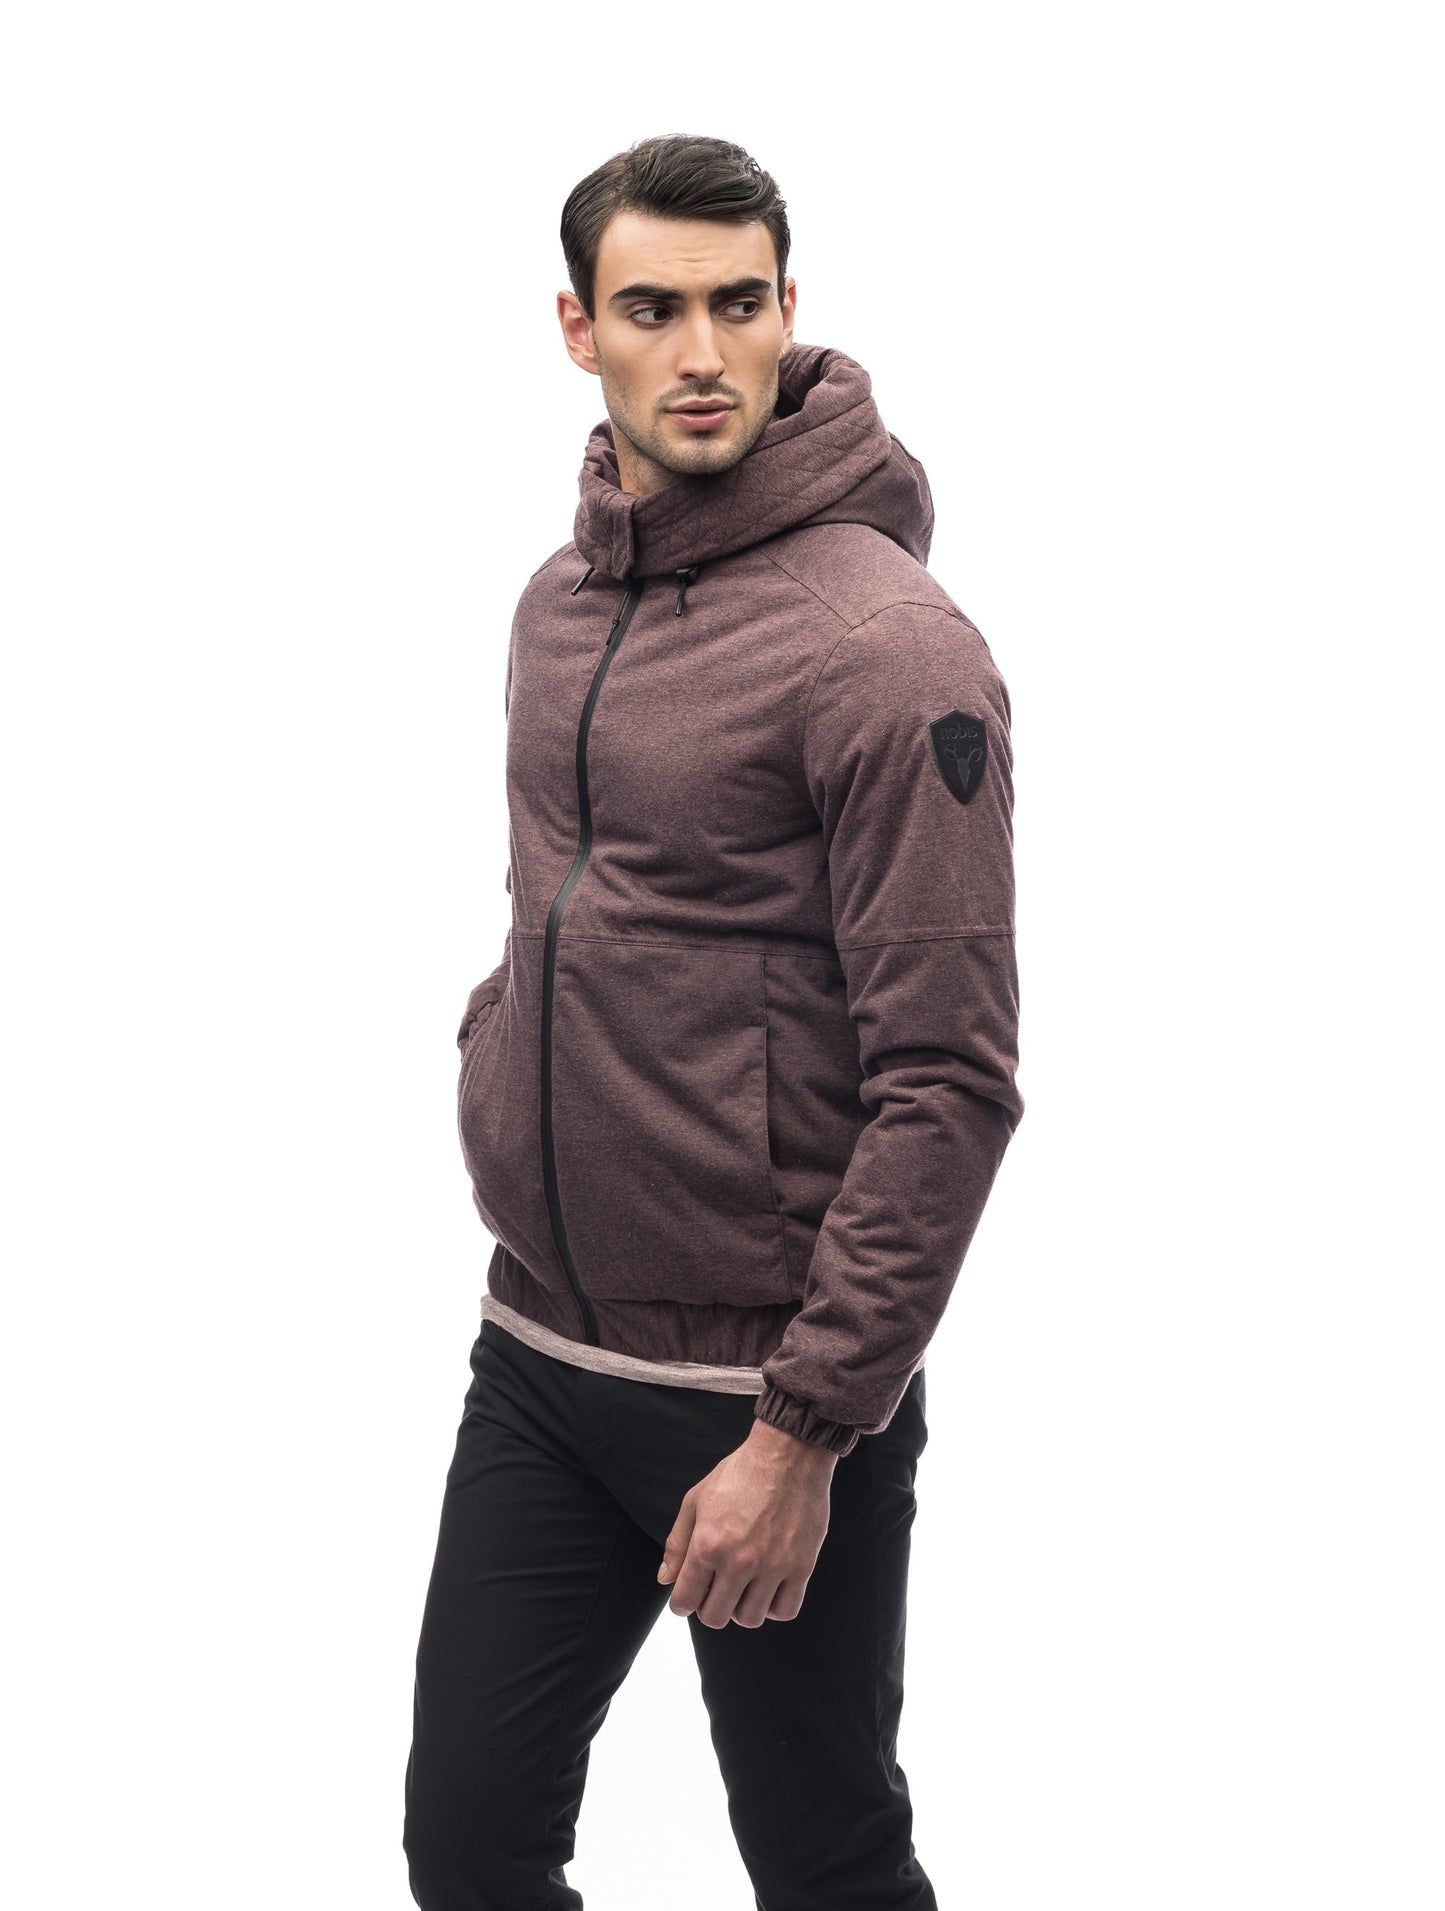 Men's lightweight down filled jersey hoodie that's windproof, waterproof and breathable in Maroon